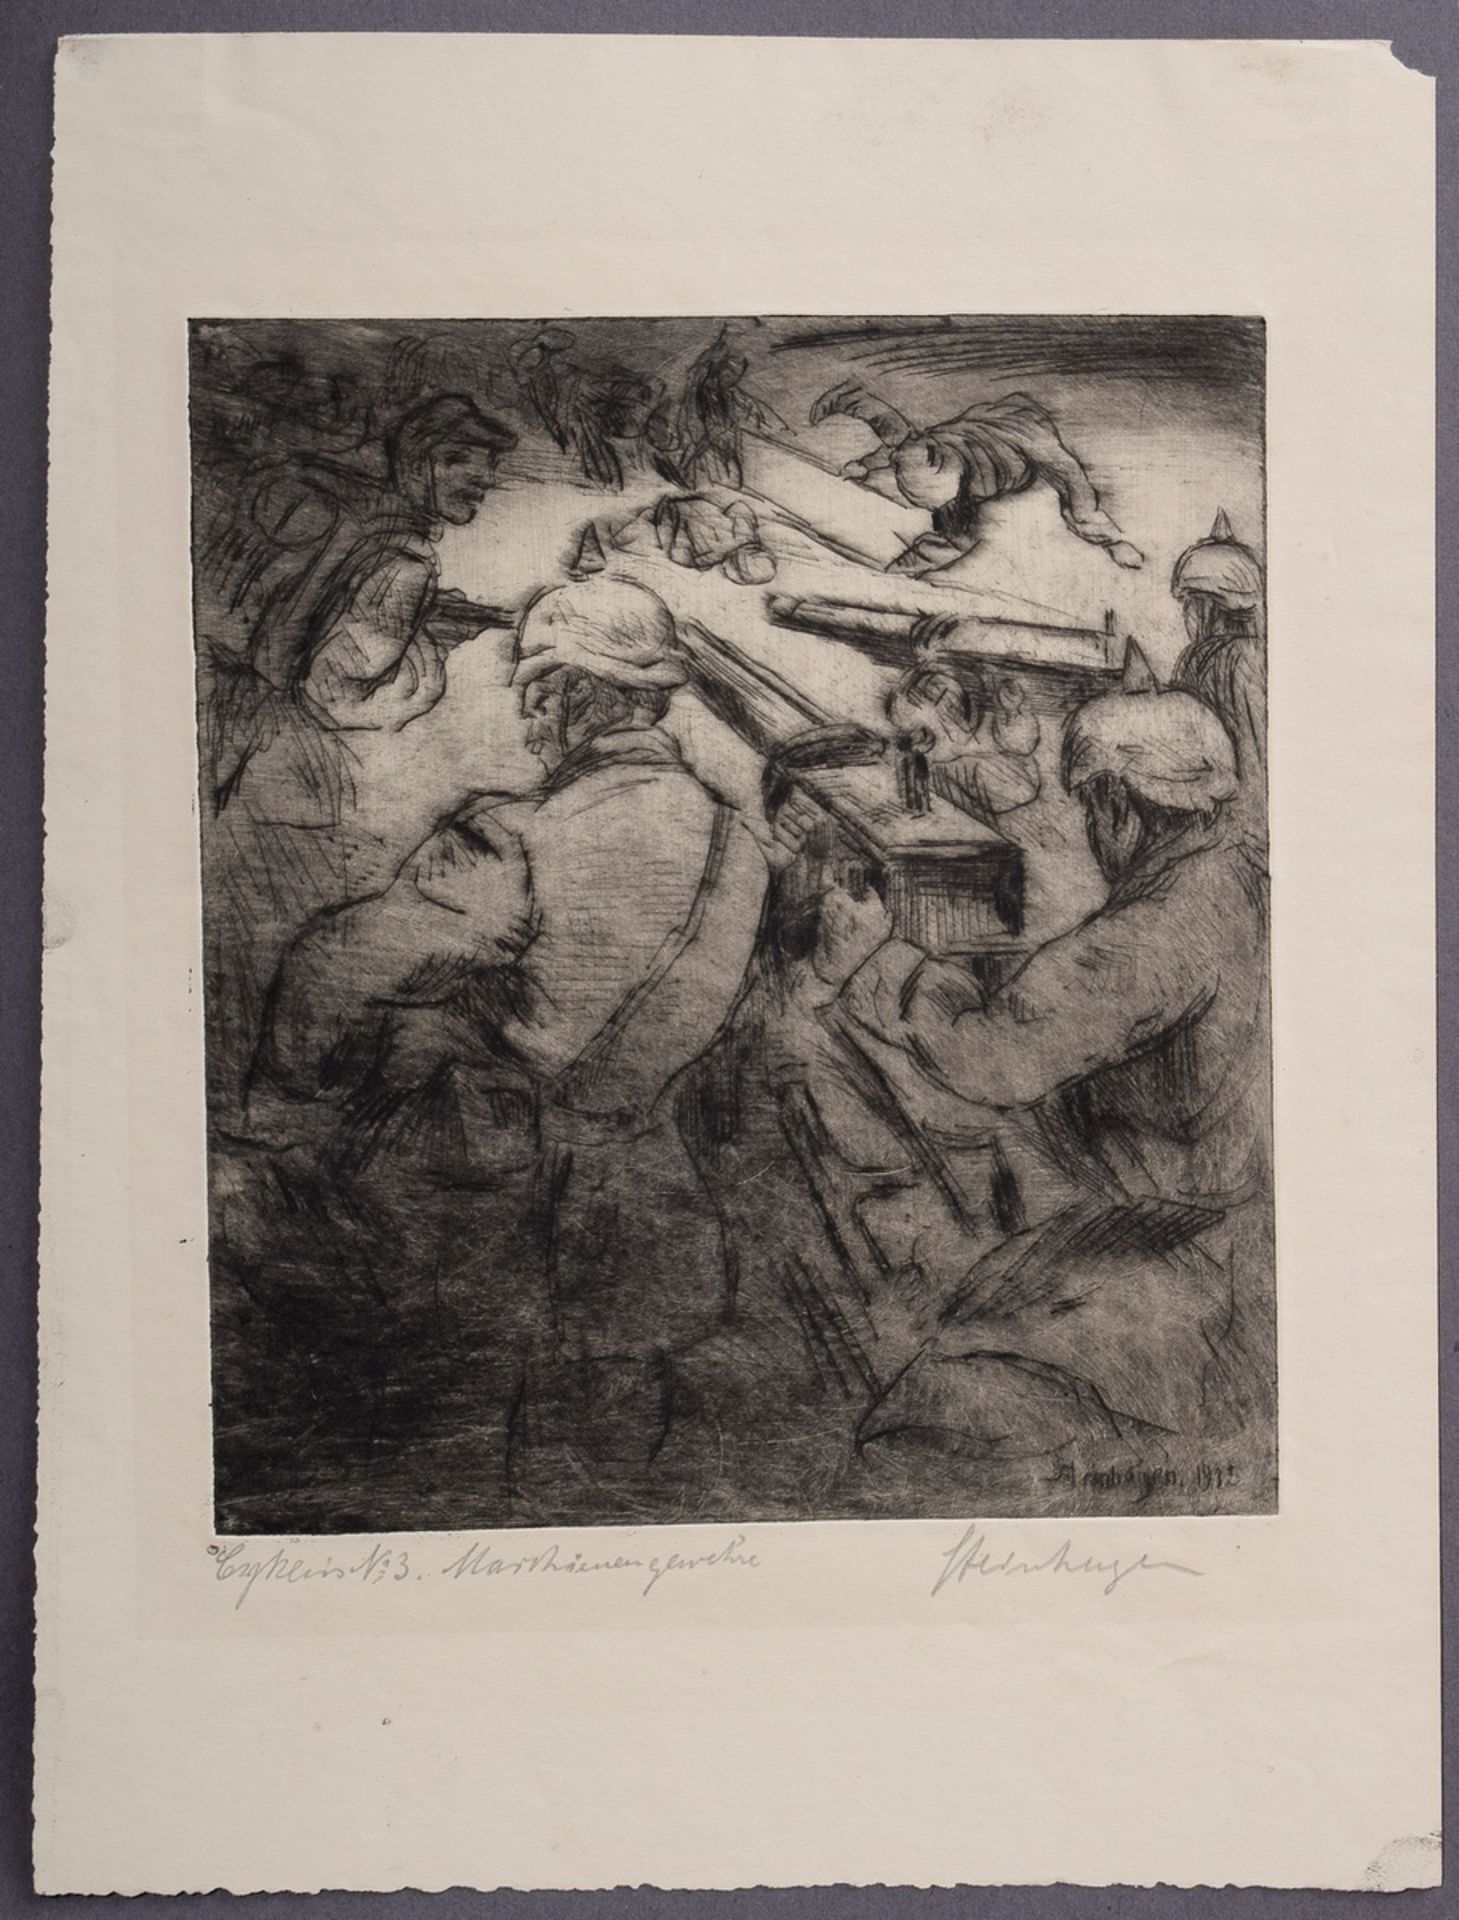 5 Steinhagen, Heinrich (1880-1948) "Scenes from World War I" 1915/16, etchings, some signed and dat - Image 7 of 11